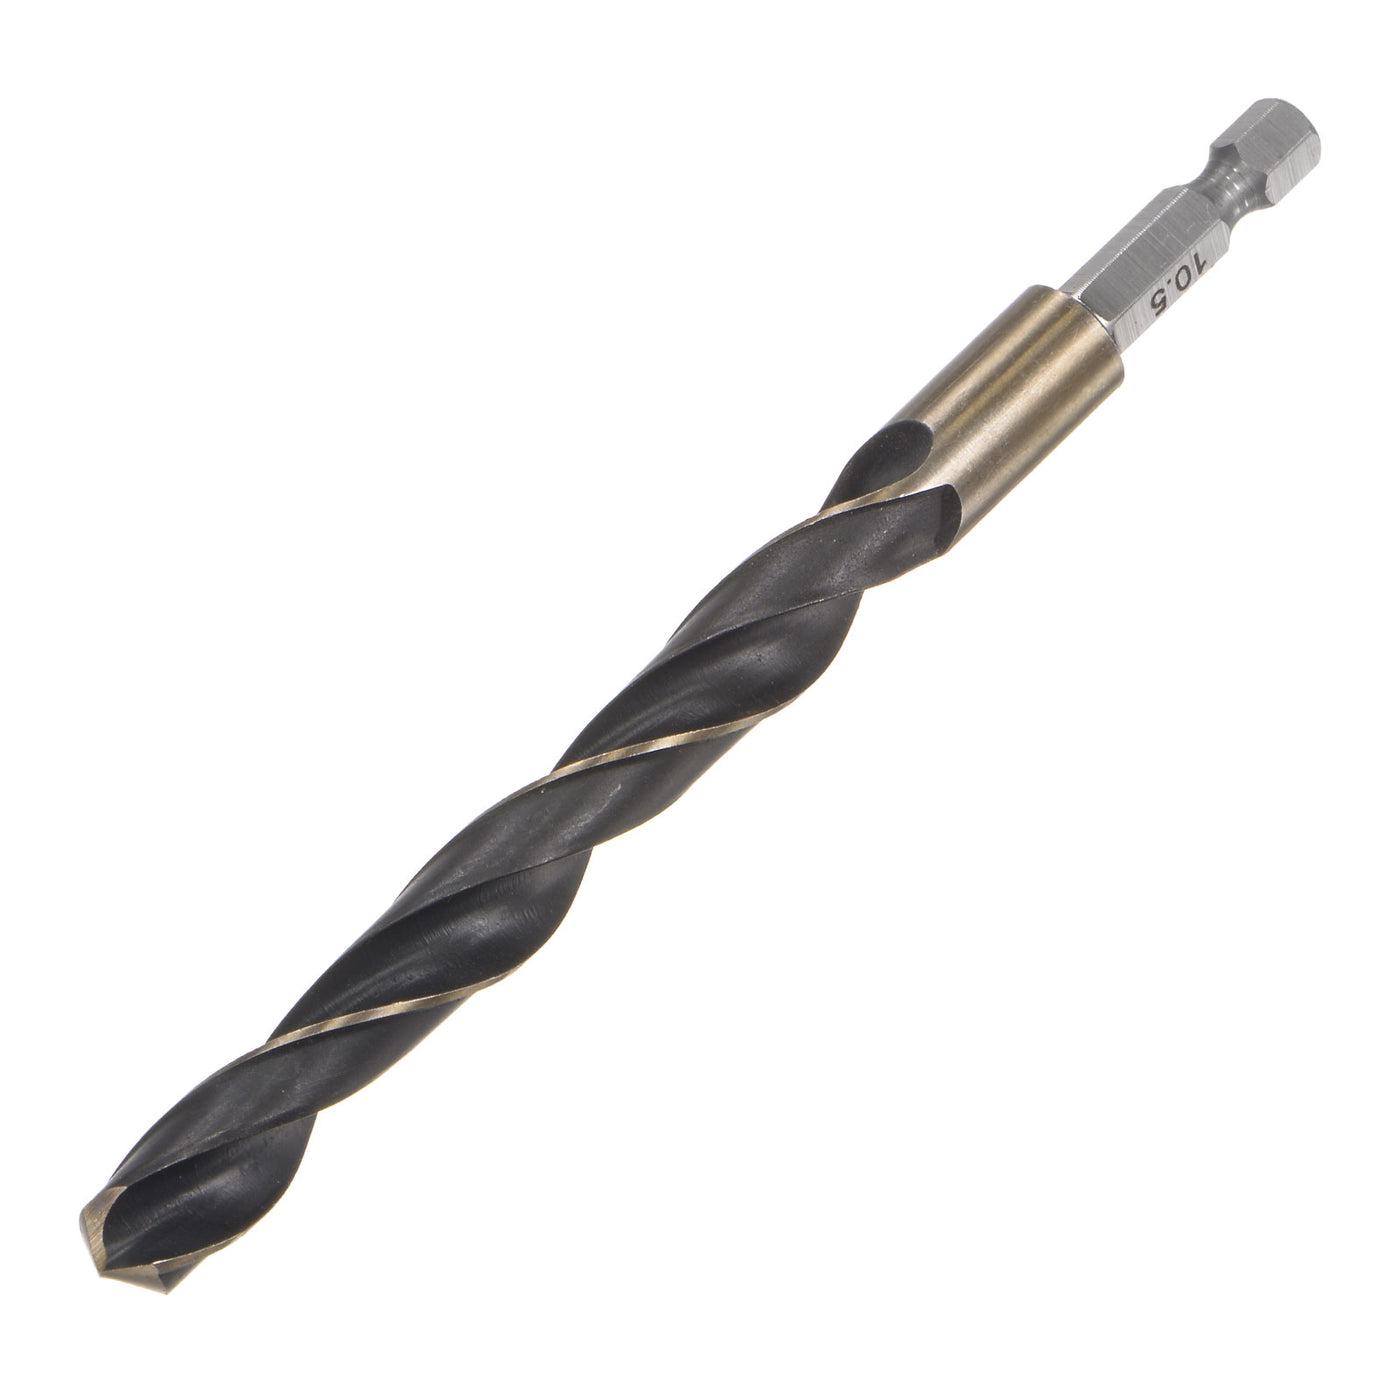 uxcell Uxcell 10.5mm High Speed Steel Twist Drill Bit with Hex Shank 132mm Length